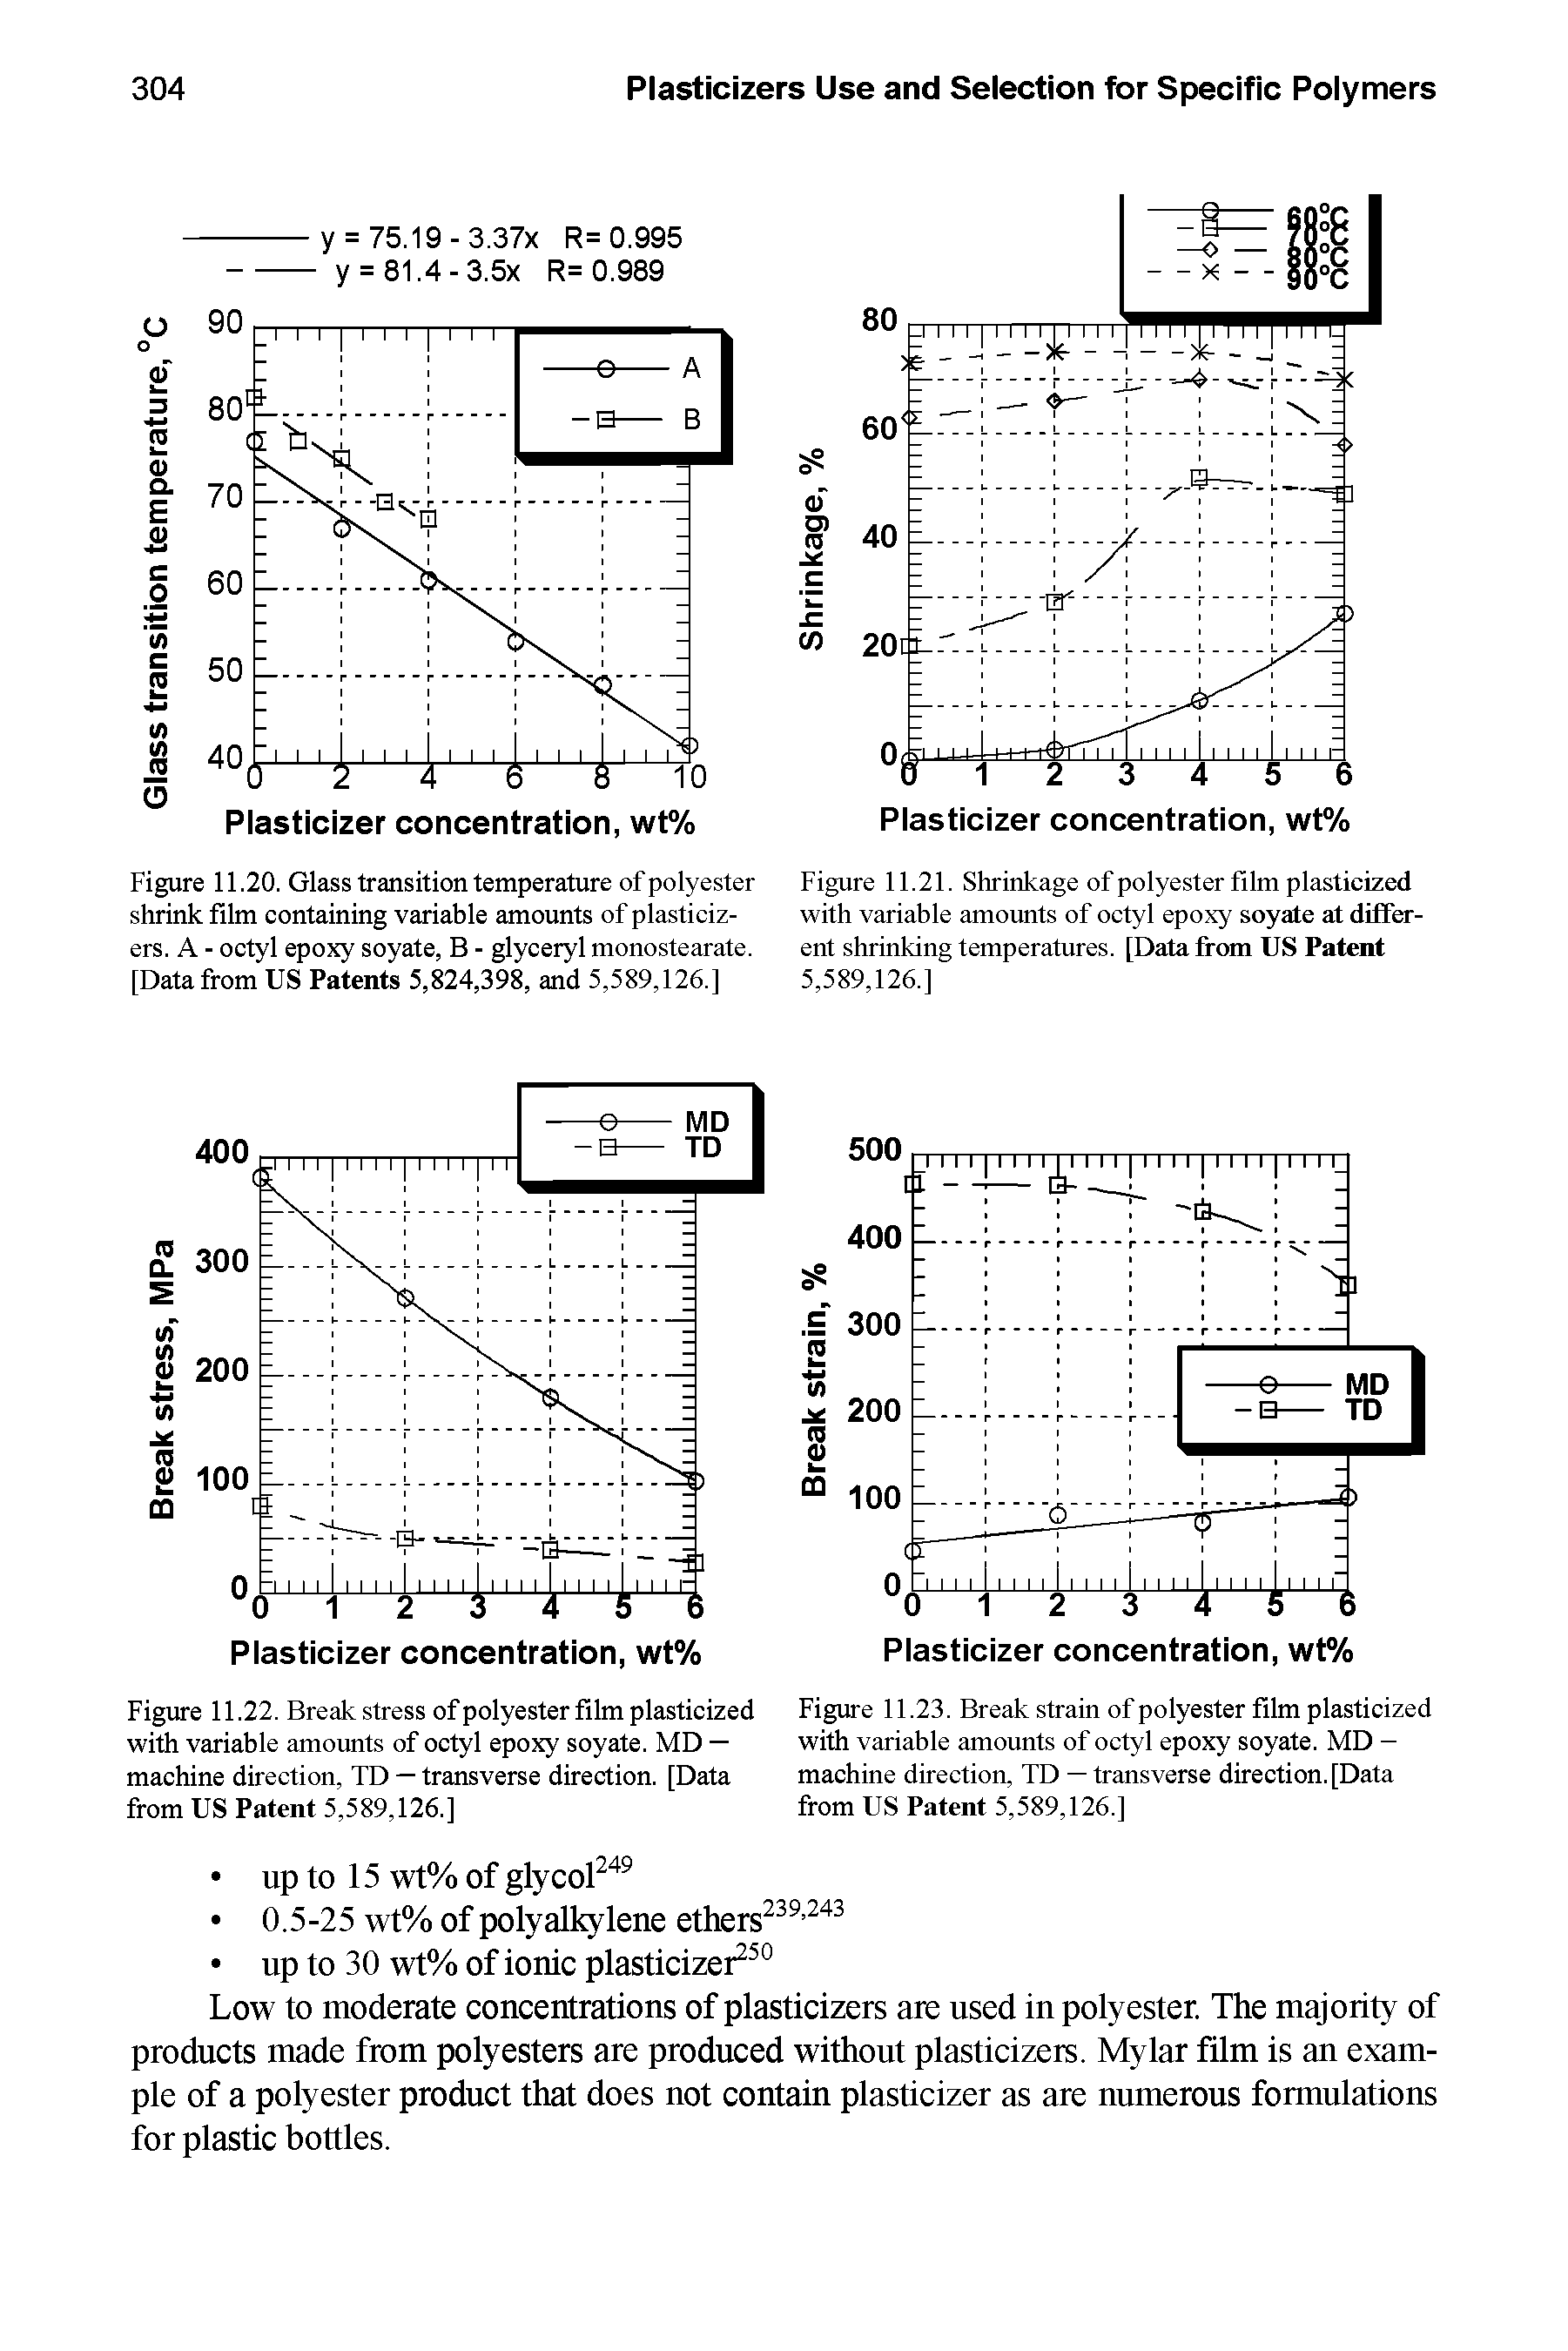 Figure 11.20. Glass transition temperature of polyester shrink film containing variable amounts of plasticizers. A - octyl epoxy soyate, B - glyceryl monostearate. [Data from US Patents 5,824,398, and 5,589,126.]...